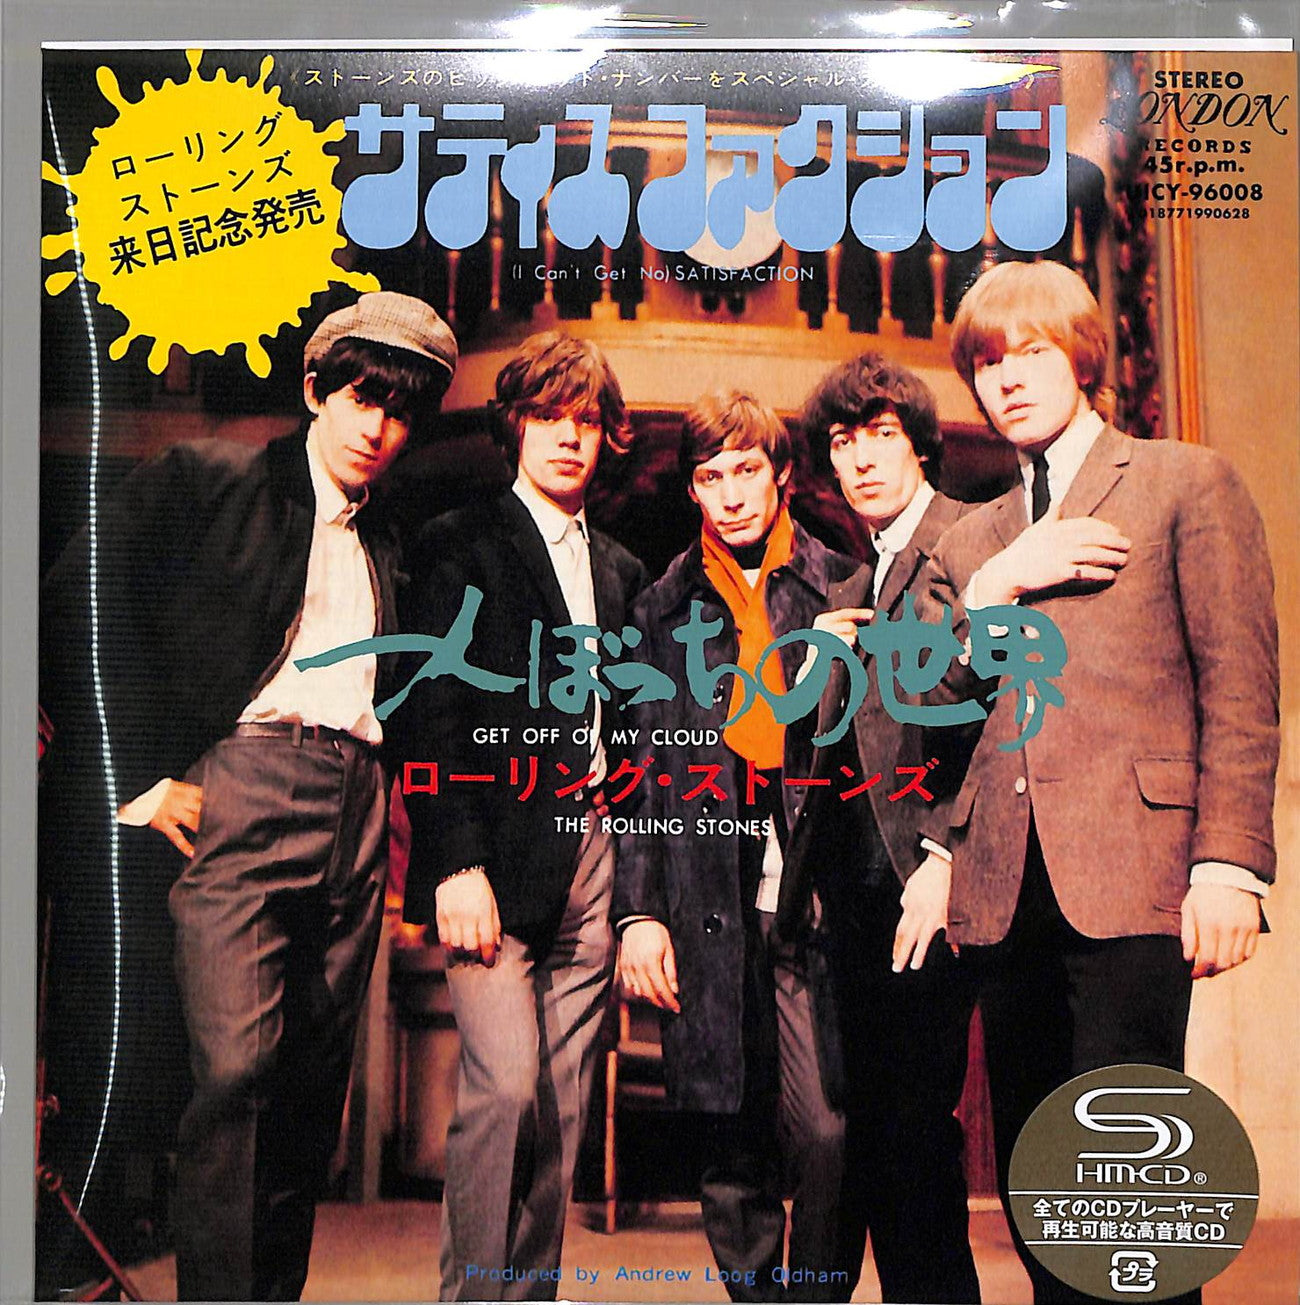 The Rolling Stones - (I Can'T Get No) Satisfaction / Get Off My Cloud - Japan  7inch Mini LP SHM-CD Limited Edition